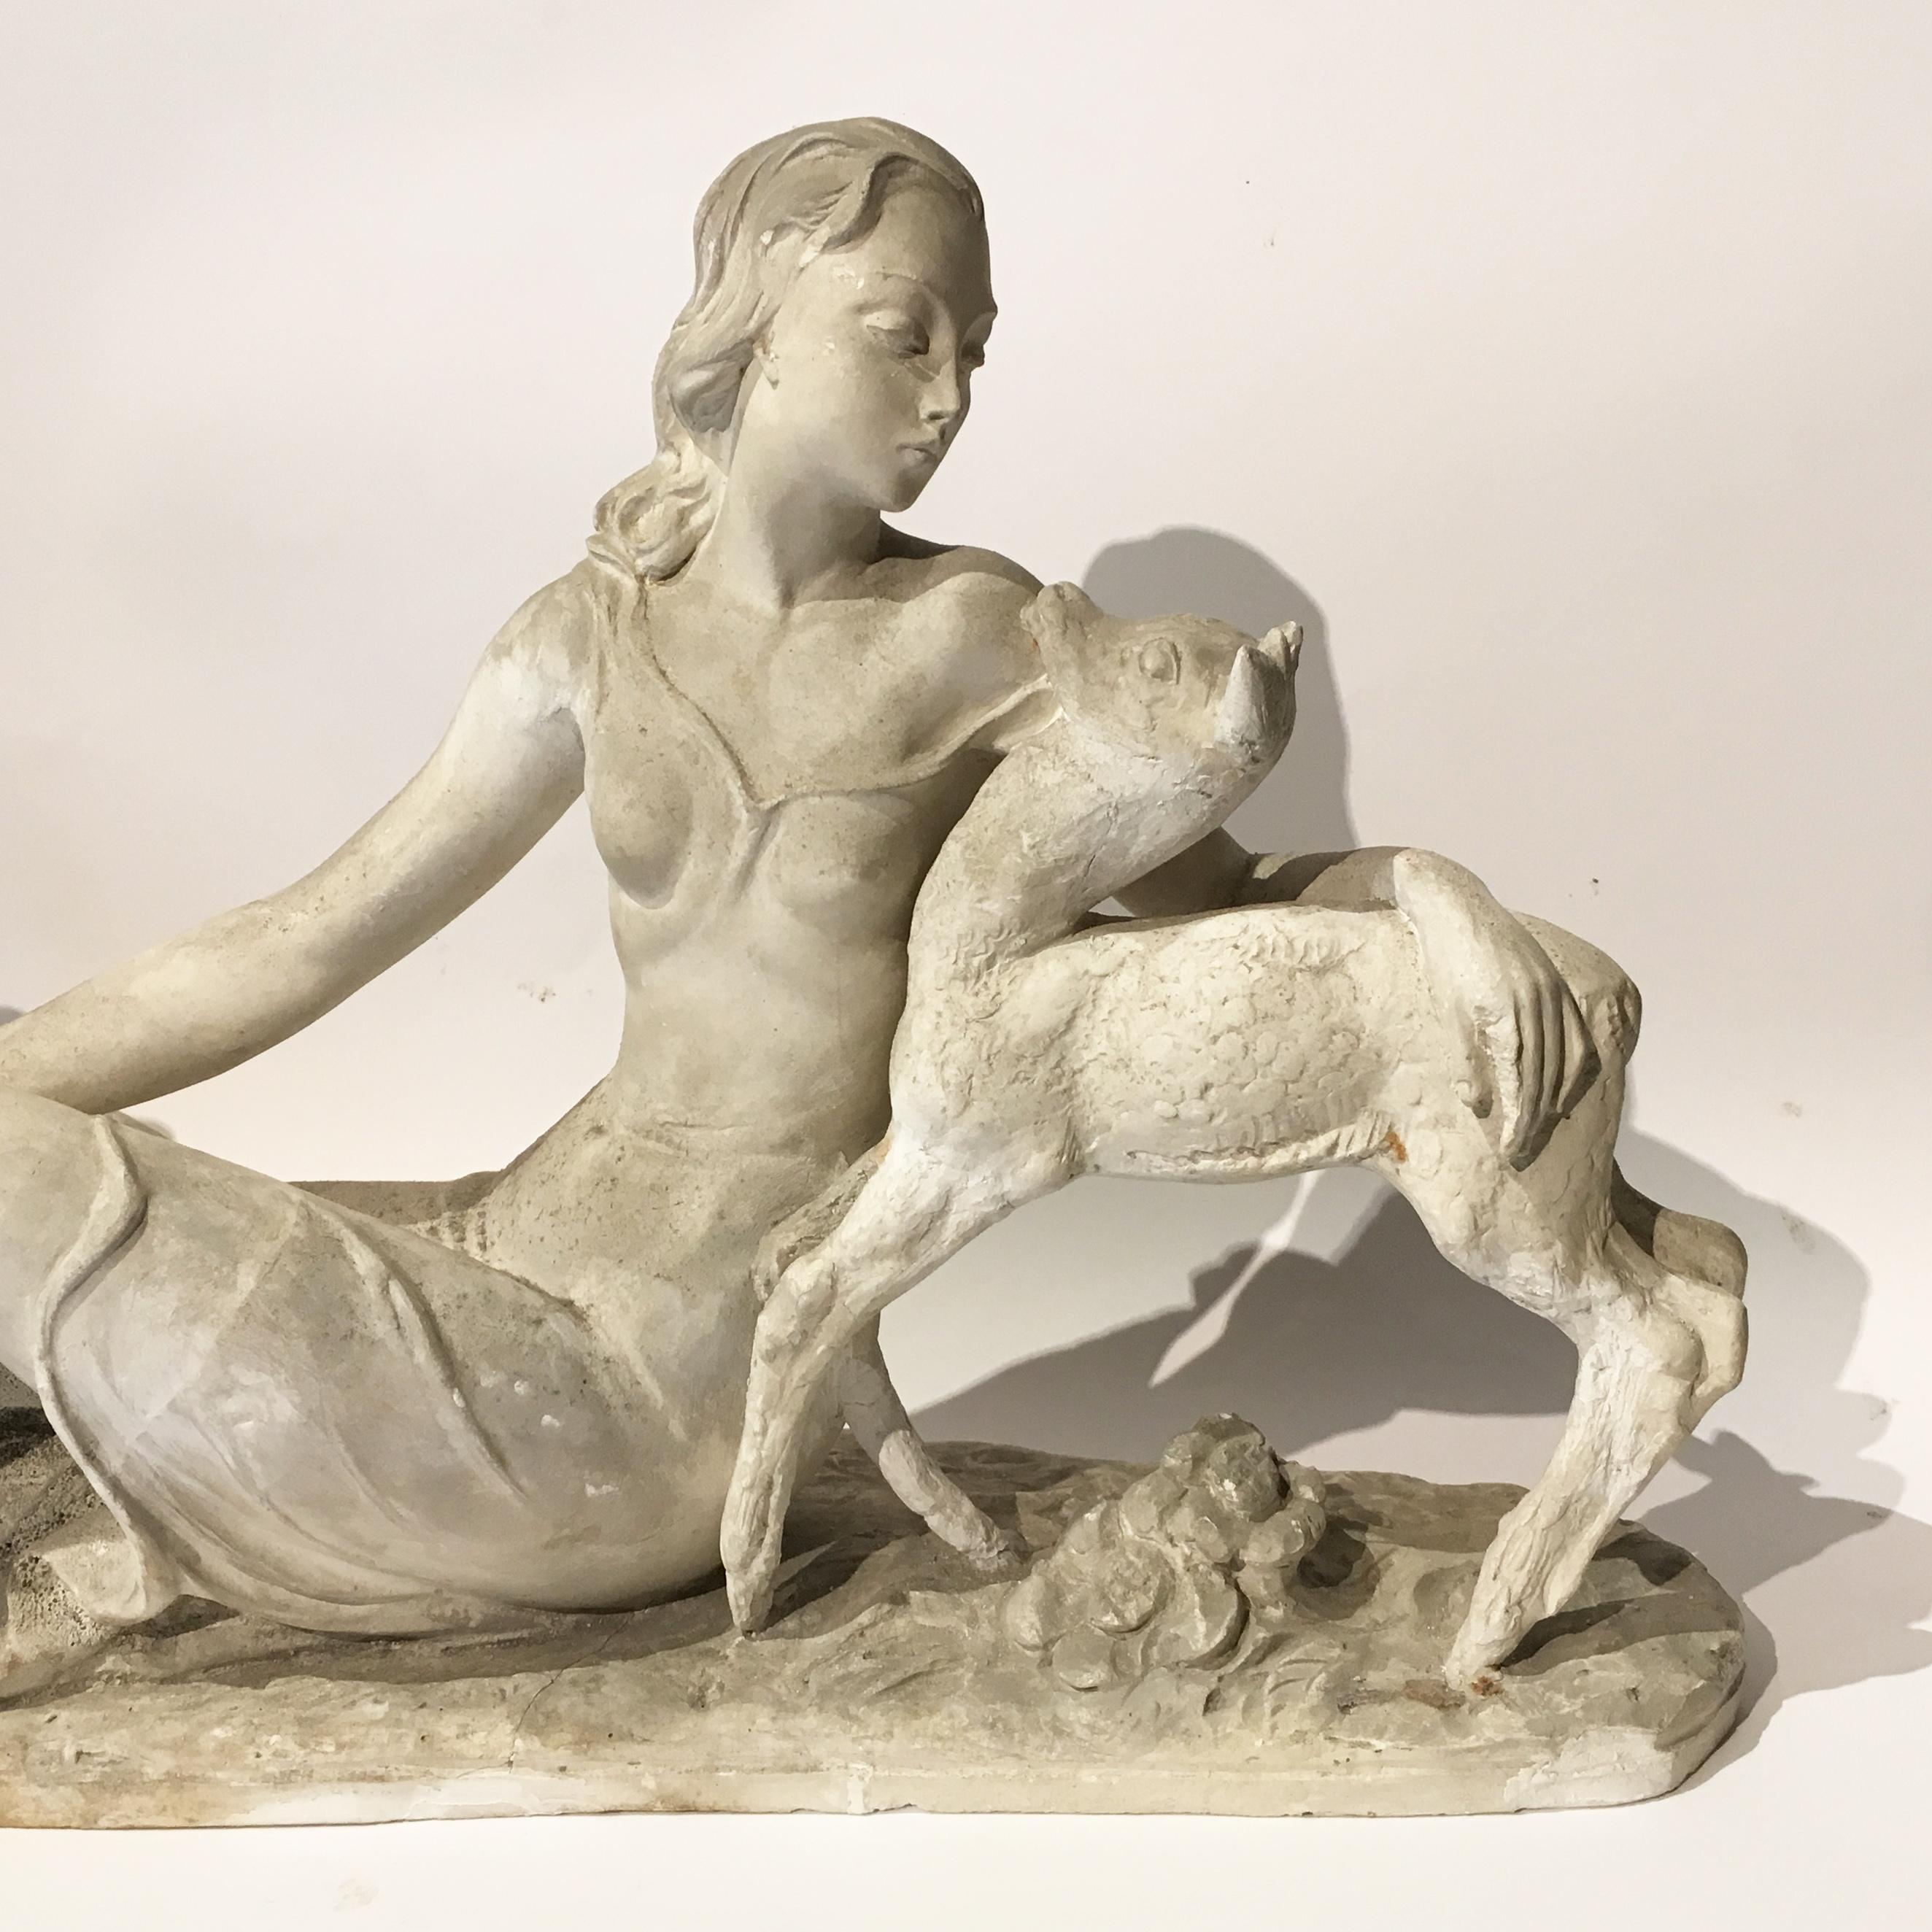 Early 20th Century Italian Art Deco Plaster Sculpture by Mario Bandini For Sale 1